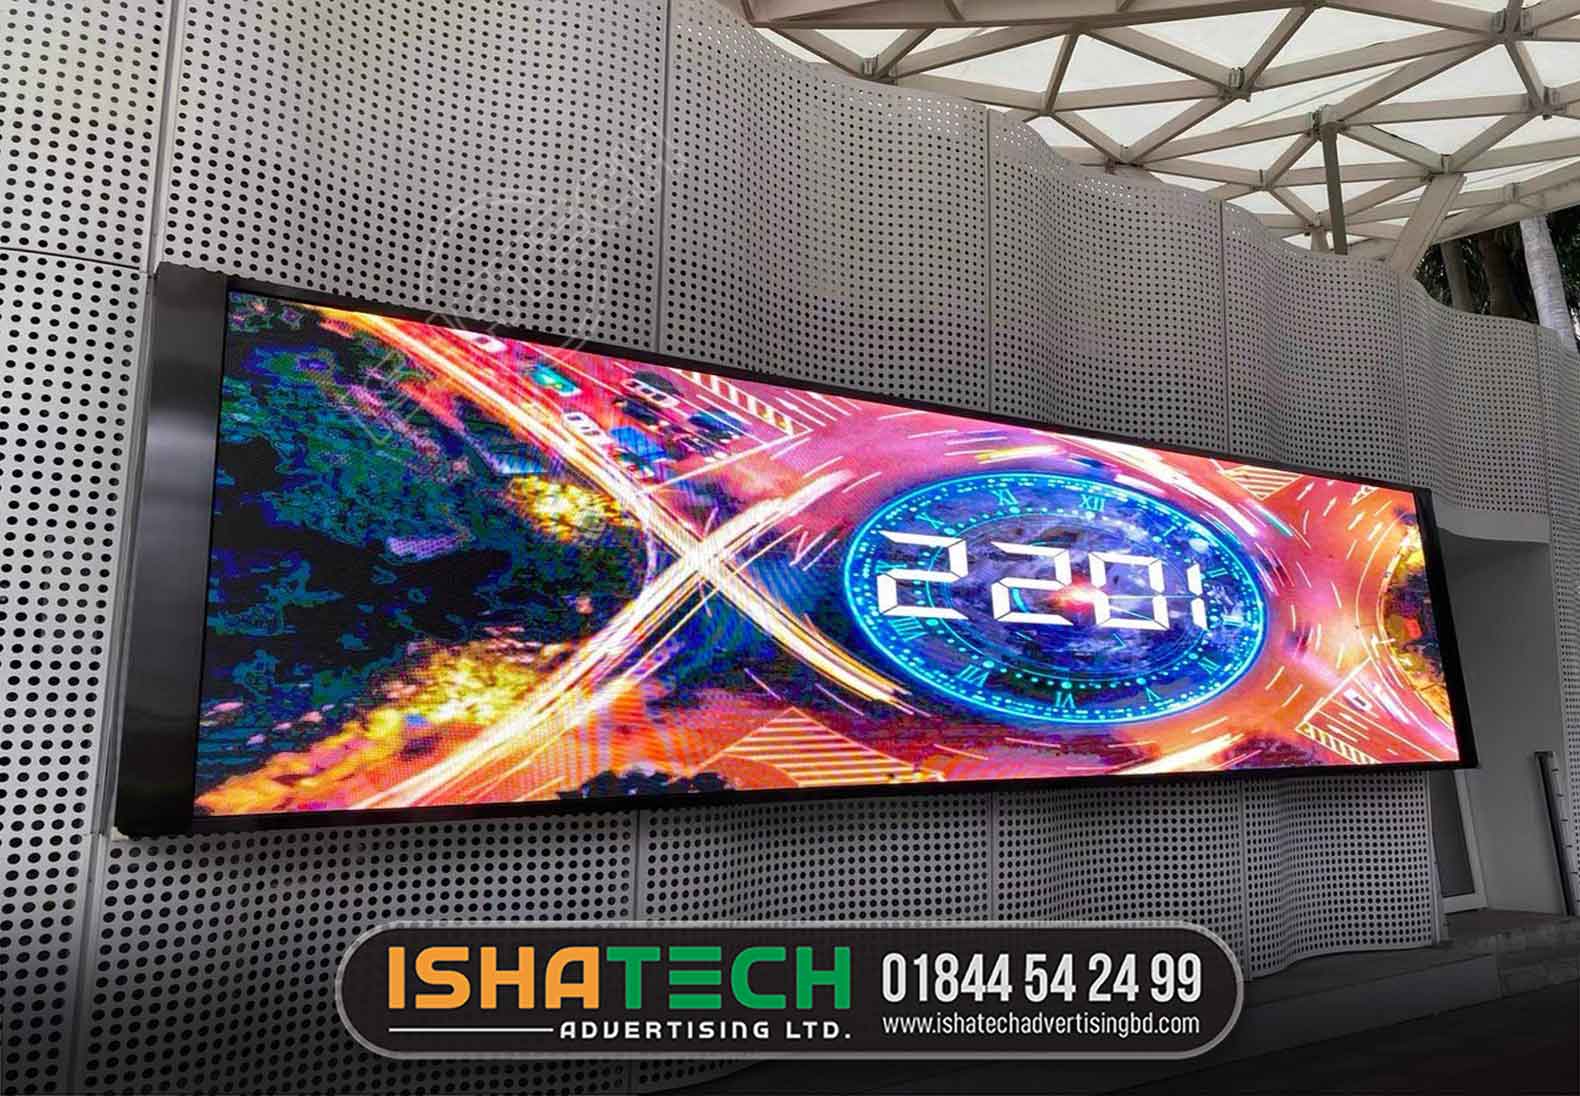 LED TV PRICE IN BANGLADESH WE ARE LED SIGN BD LTD PROVIDING, MANUFACTURER AND SUPPLIER OF LED/LCD VIDEO WALL TV. LED/LCD TV SIZE AVAILABLE 32 inch, 40inch, 43inch, 49inch, 50inch, 55inch, 65inch, 75inch. We are provide LED/LCD TV BRAND SAMSUNG, SONY, XIAOMI, HAIER, SIGNER, LG, SMART, STAREX. Starex 17NB 17" Wide LED Television Price 5,200৳ Smart SEL-24L22KS 24" HD Basic LED Television Price 12,100৳ Haier H32D2M 32 Inch Miracast HD Non-Smart LED Television Price 17,050৳ LG 32LK510B 32" HD LED Television Price 22,000৳ Samsung 32N4010 32" Basic HD LED Television Price 18,150৳ OnePlus 32 Y1G Y Series 32-Inch HD Smart Android LED Television Price 16,200৳ ROWA 32S52 32 Inch HD Android Smart LED Television Price 21,000৳ Samsung 32T4400 32" Smart HD LED Television Price 27,130৳ SINGER E43 SLE43A5000GOTV 43 Inch Full HD Android Smart LED Television Price 37,490৳